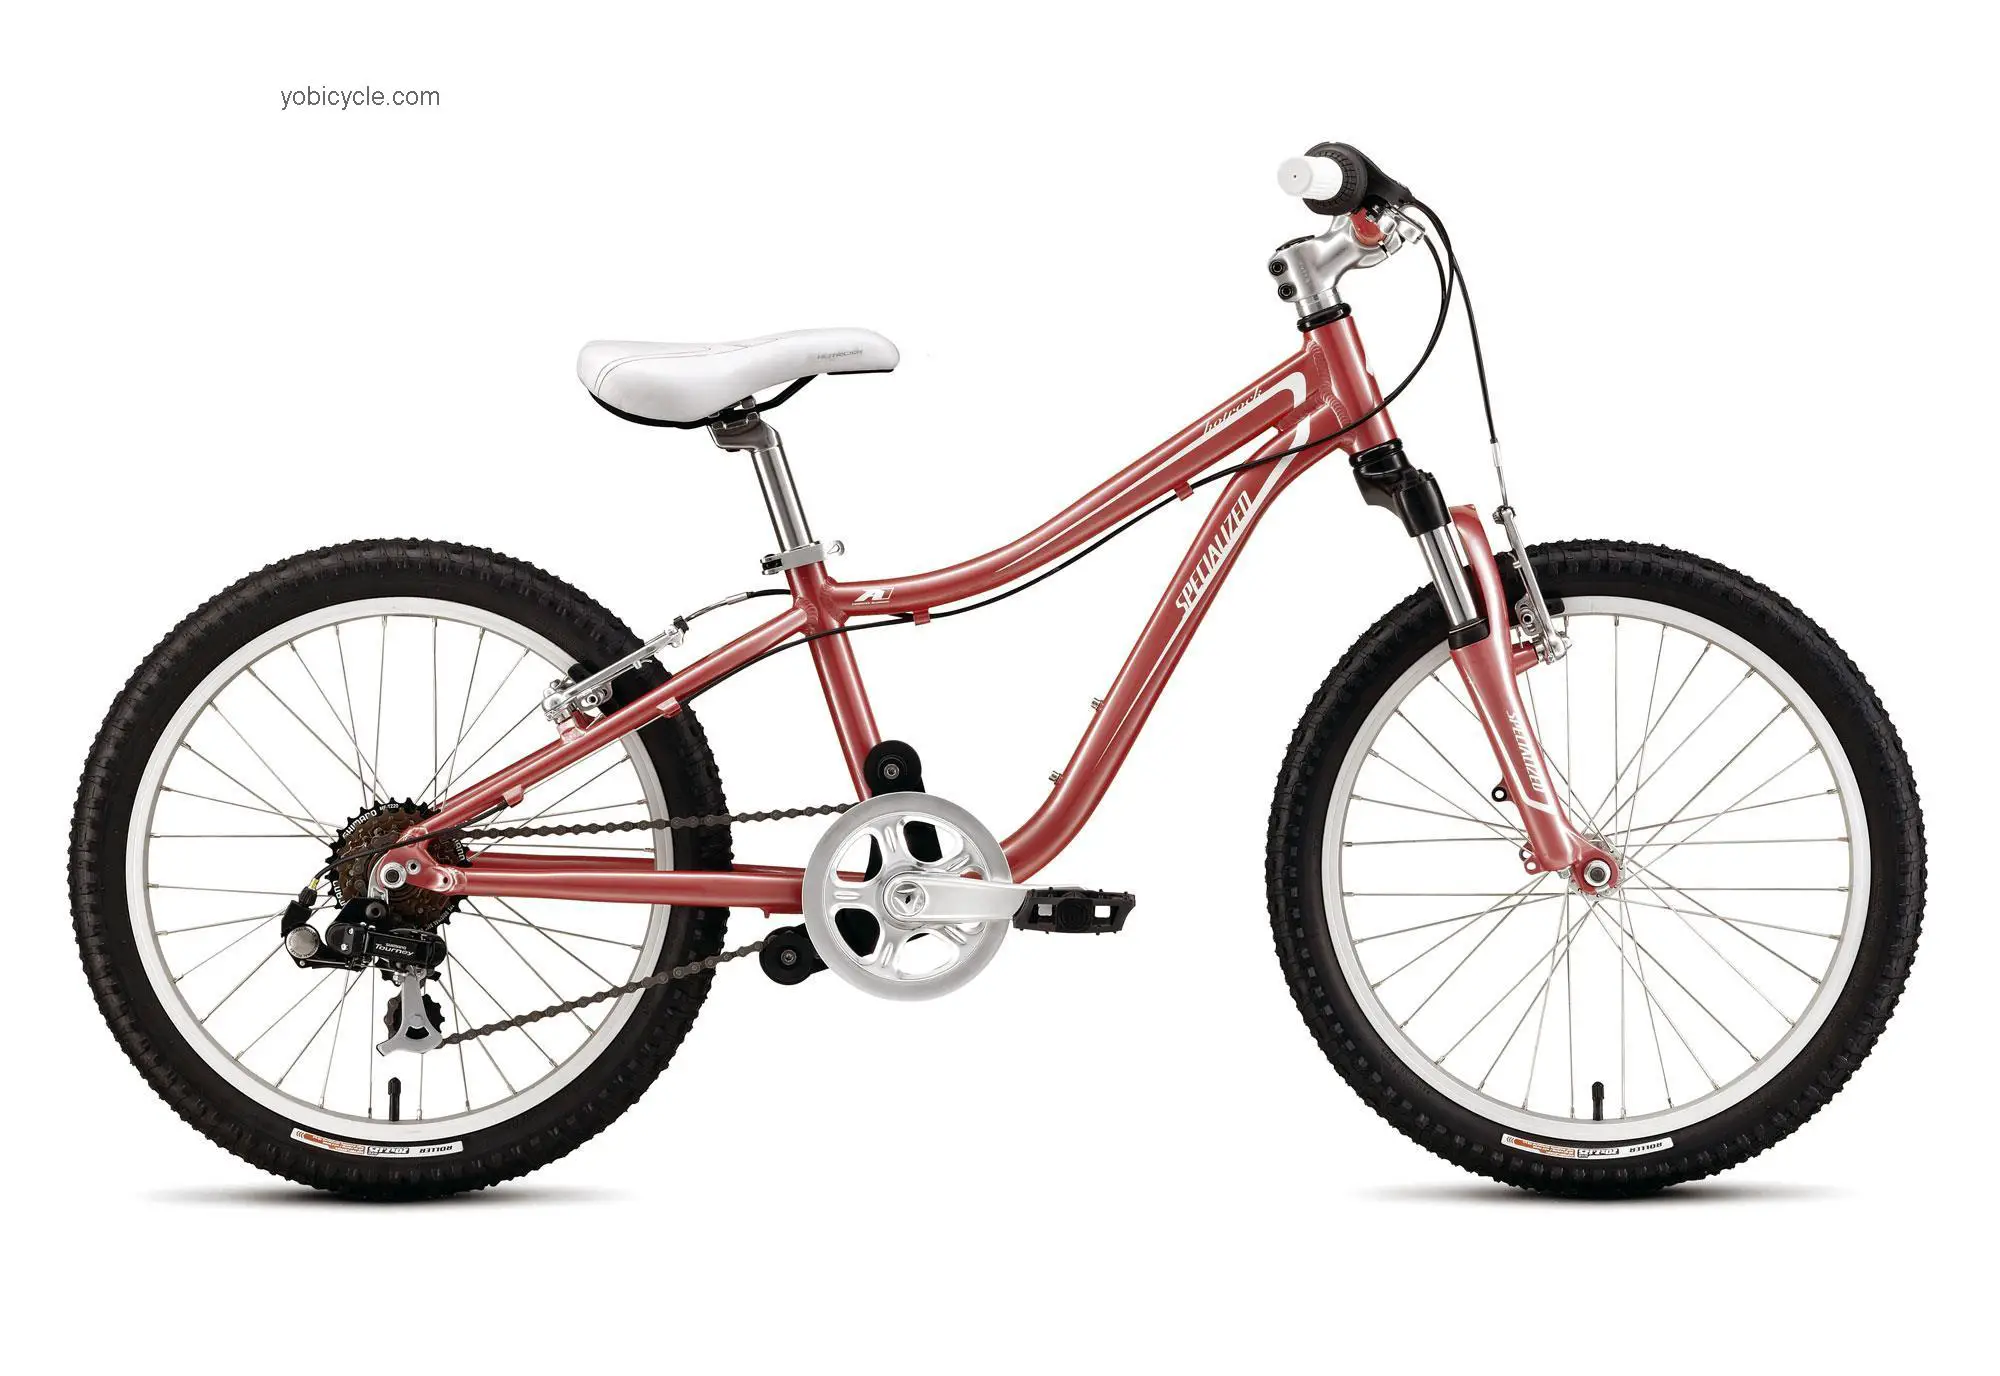 Specialized Hotrock 20 6-speed Girls 2012 comparison online with competitors